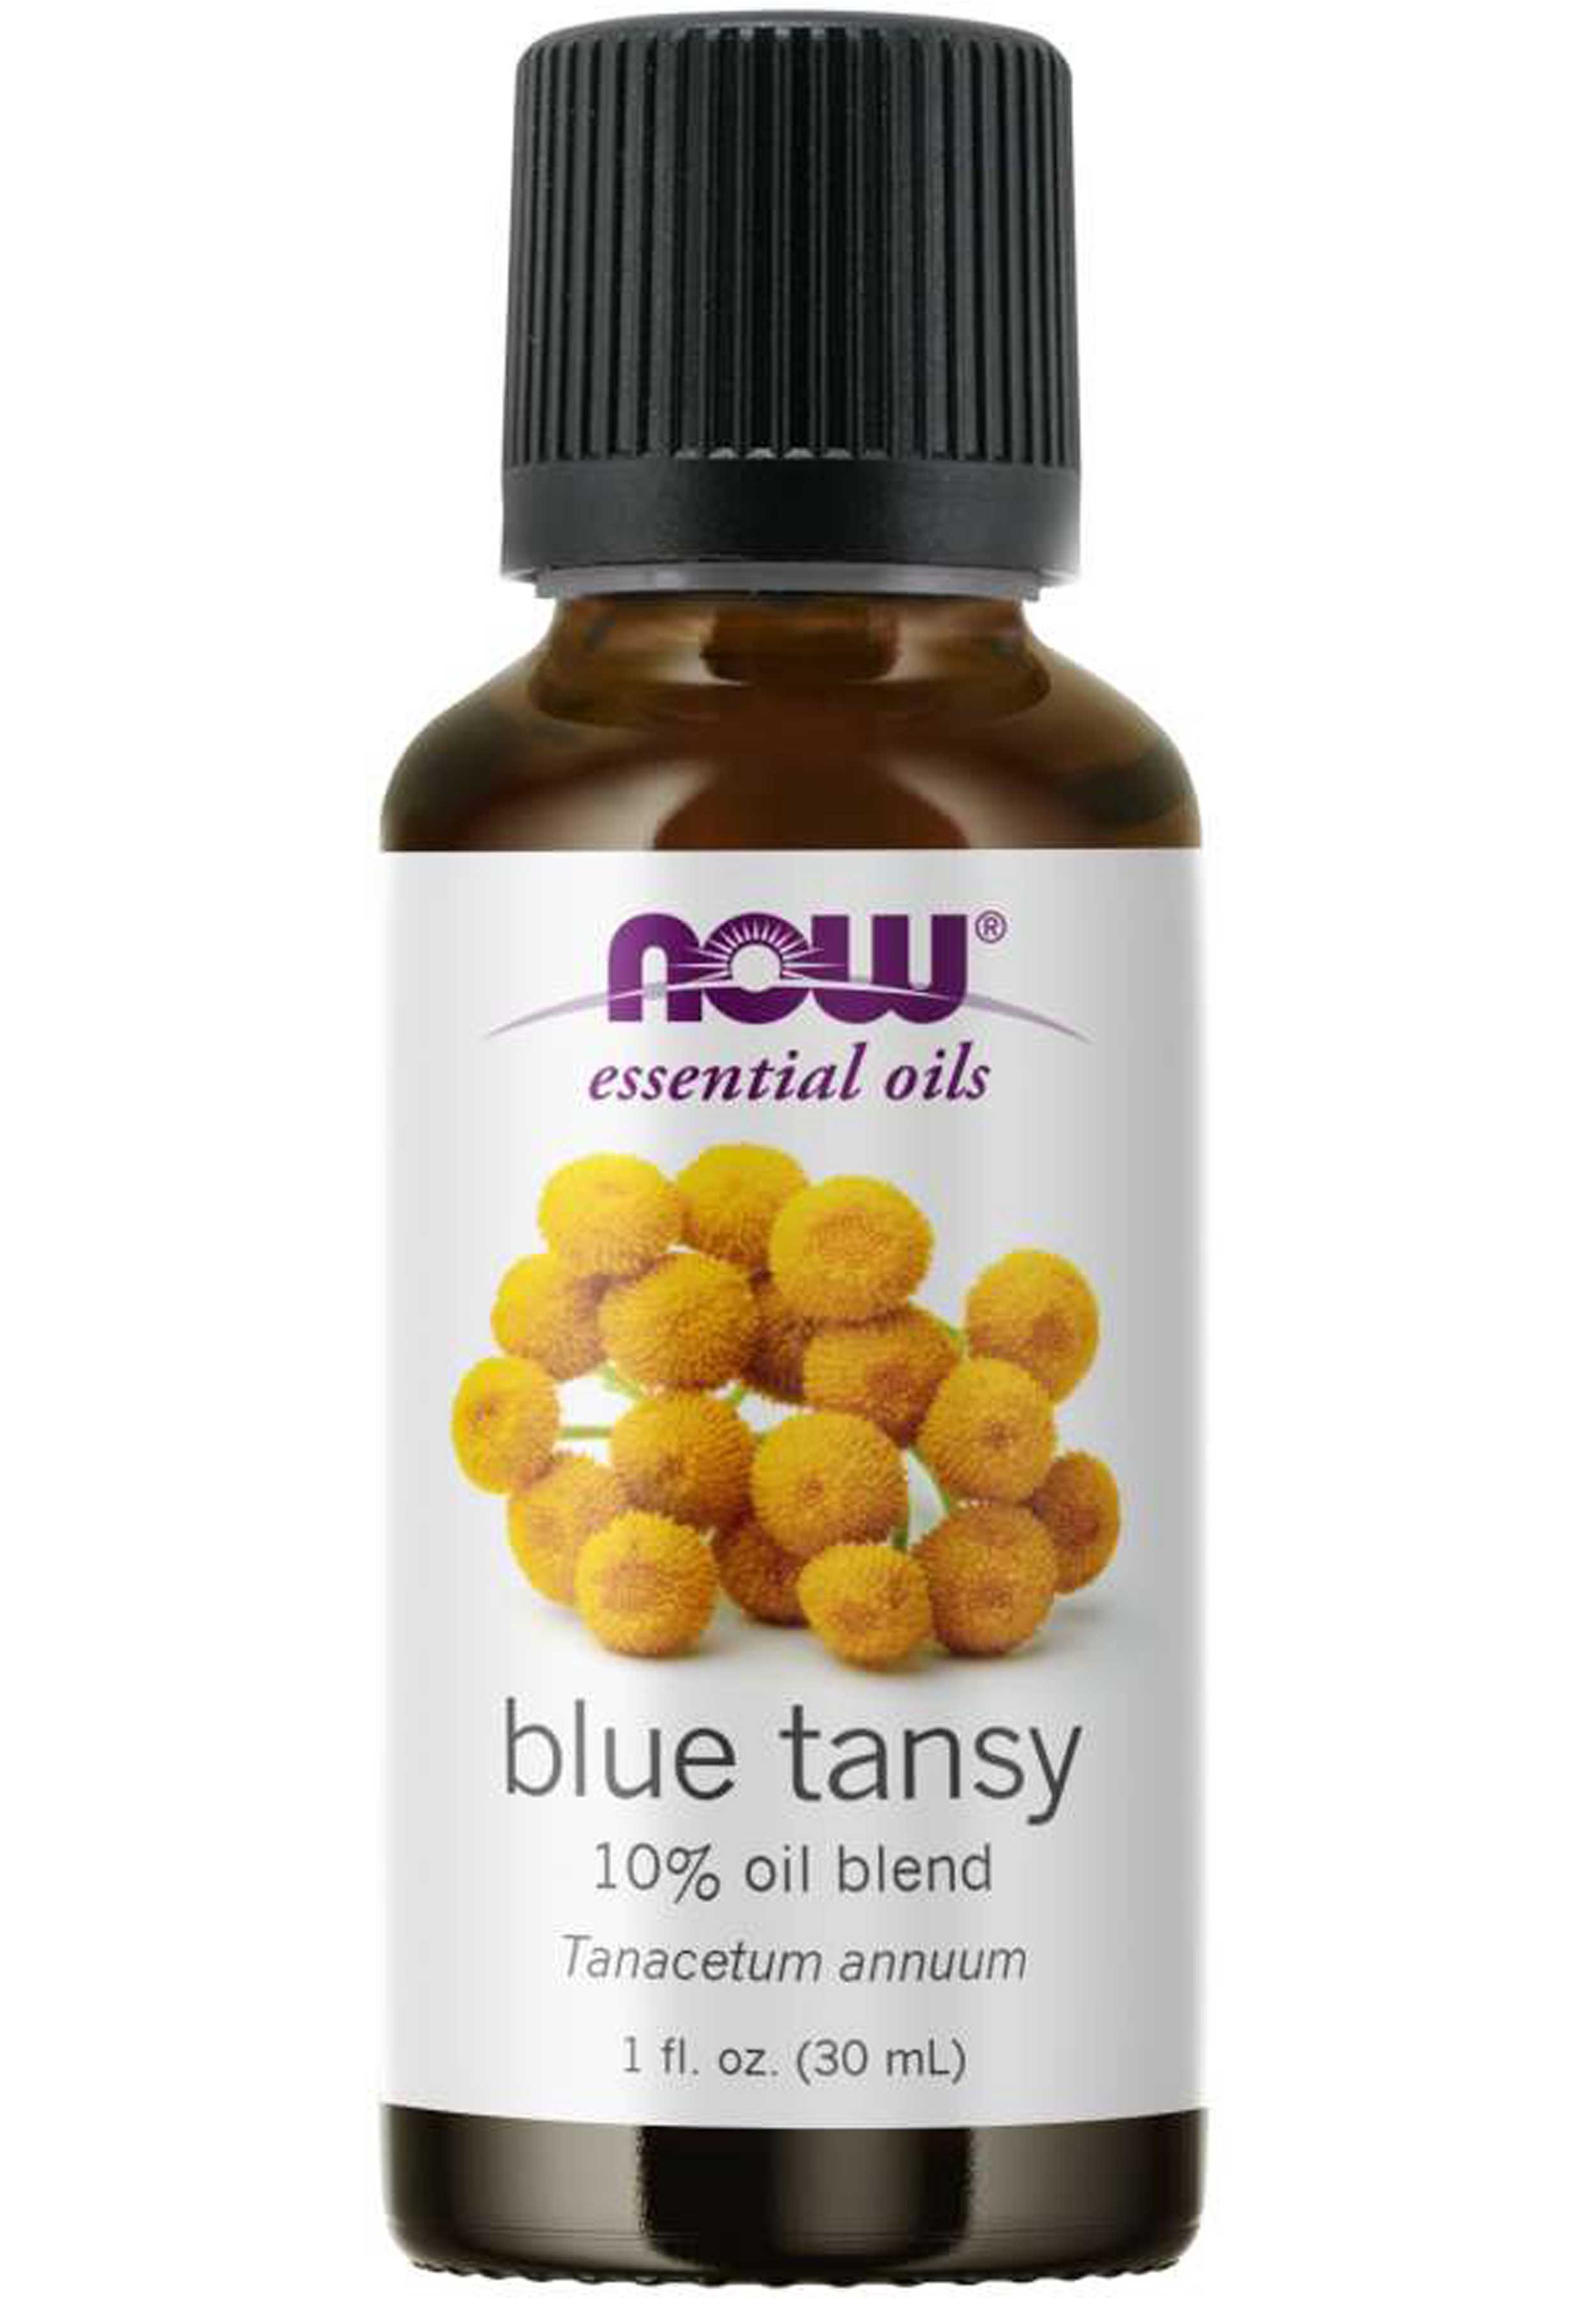 NOW Essential Oils Blue Tansy Oil Blend